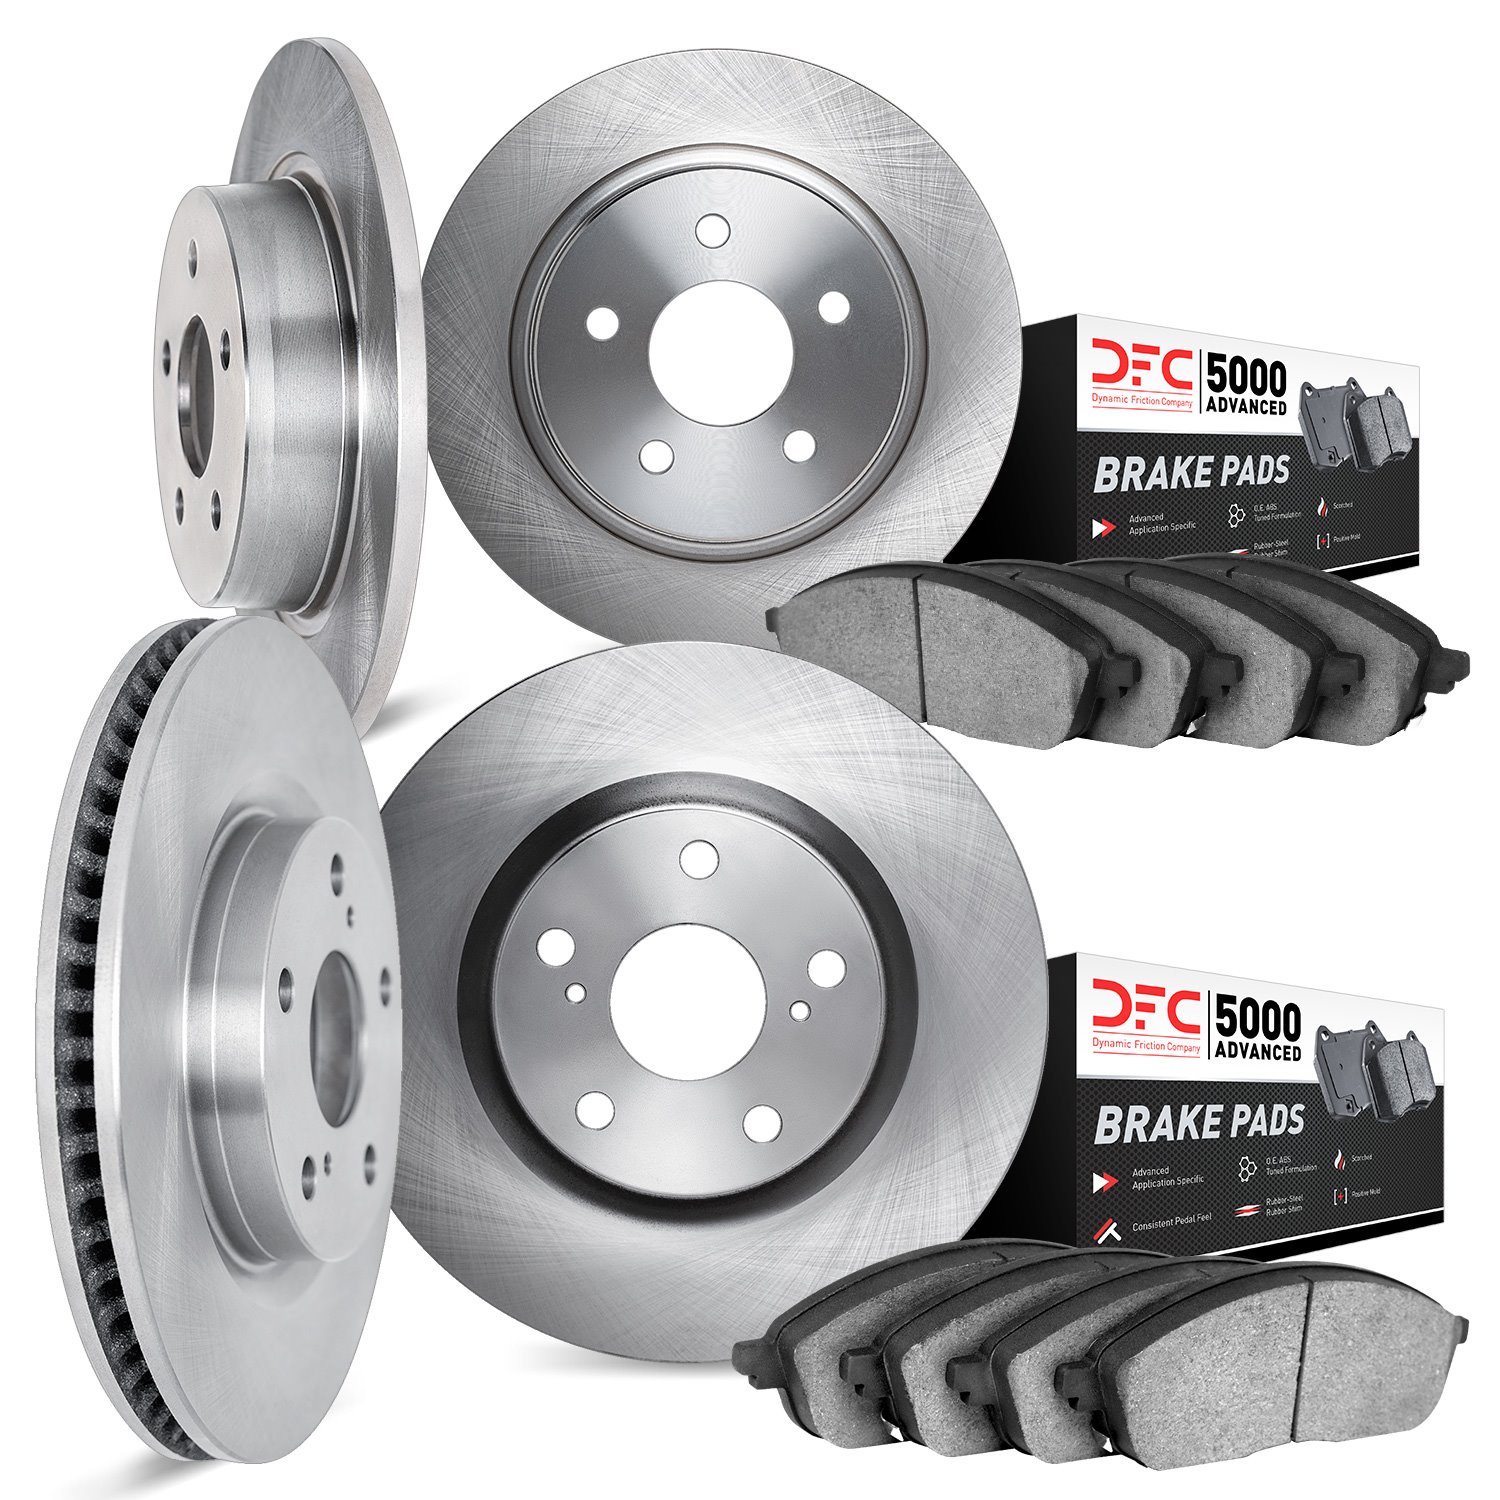 6504-74006 Brake Rotors w/5000 Advanced Brake Pads Kit, Fits Select Audi/Volkswagen, Position: Front and Rear